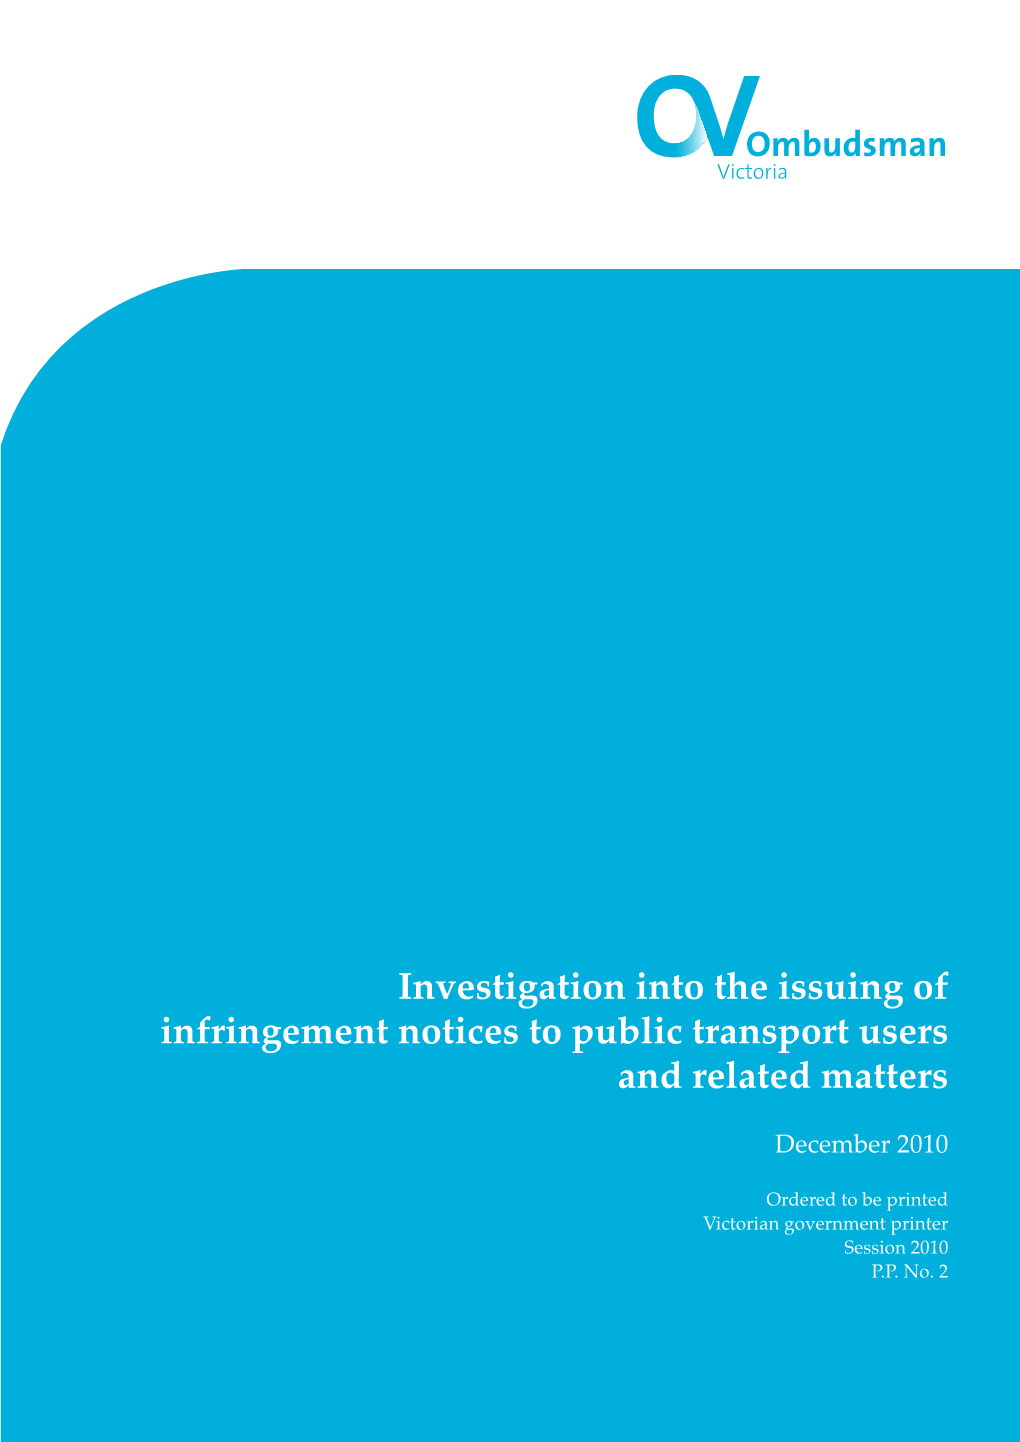 Investigation Into the Issuing of Infringement Notices to Public Transport Users and Related Matters